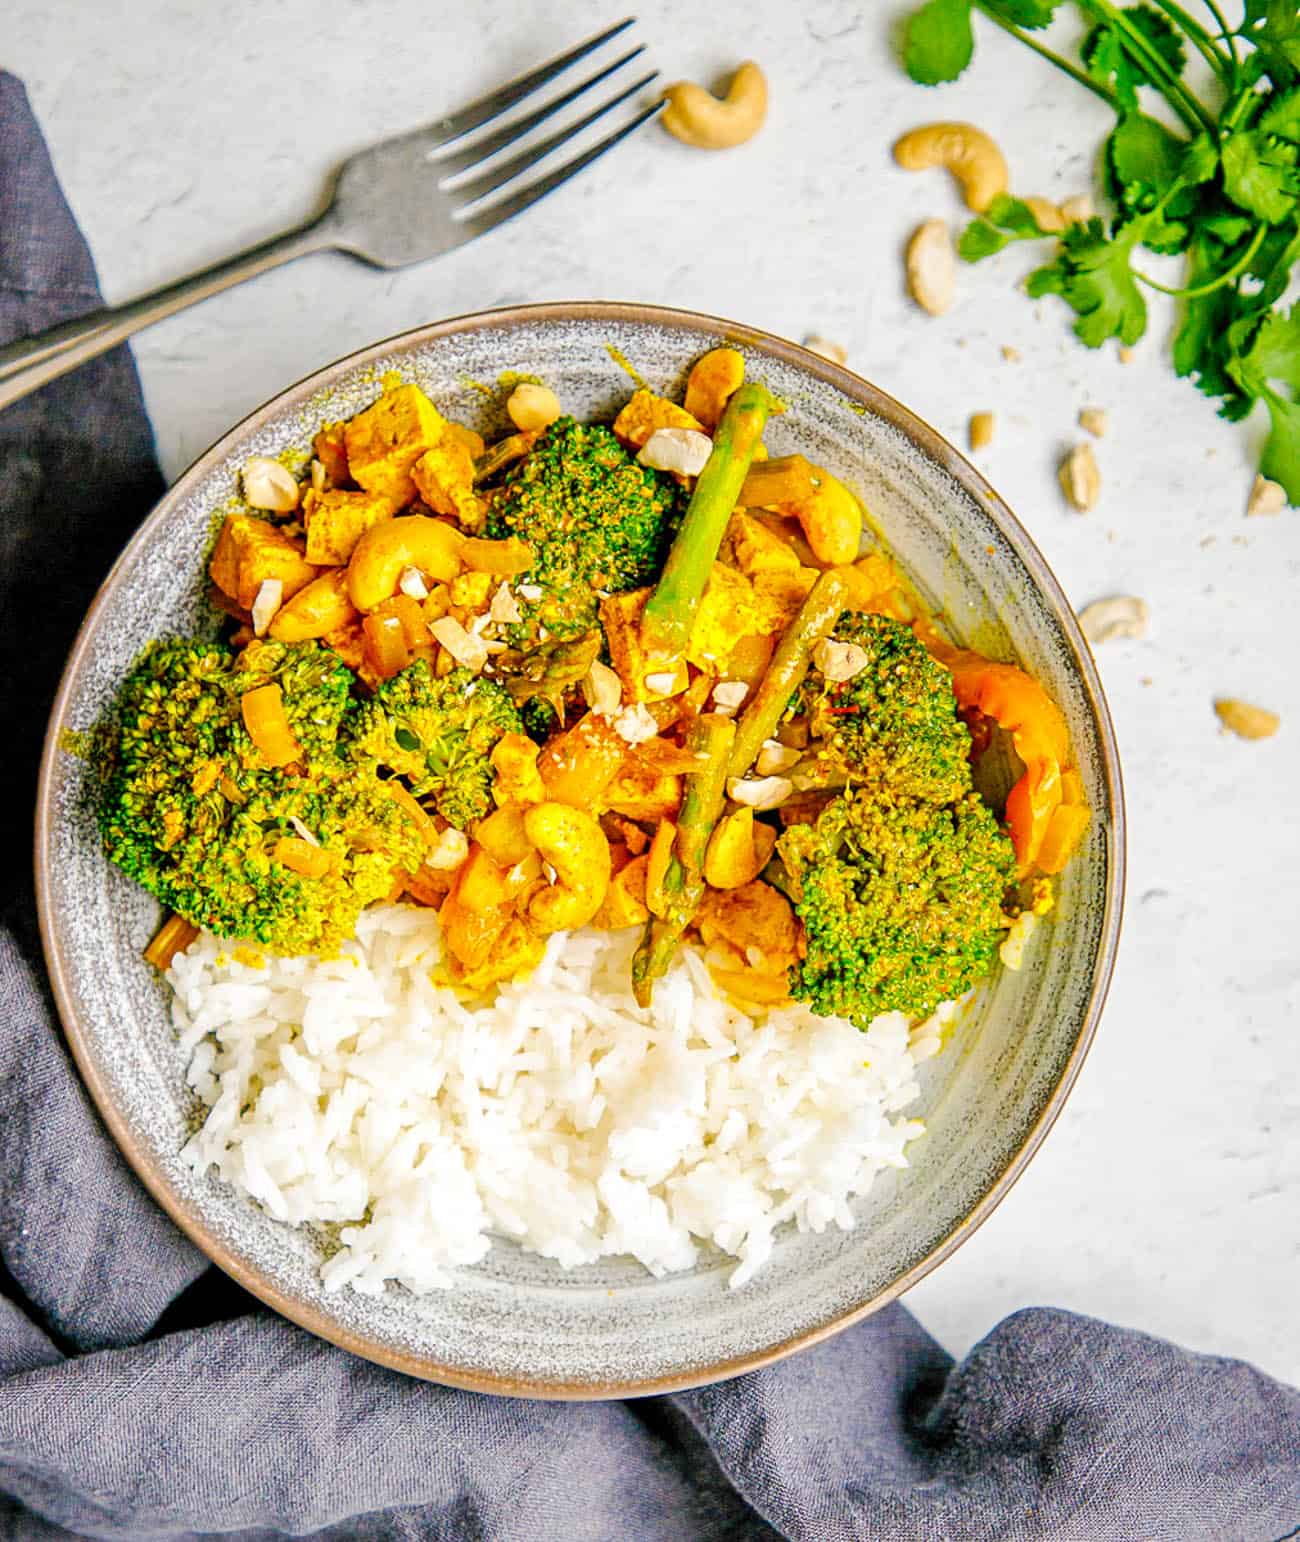 Tofu Yellow Curry with Veggies and Cashews served in a grey bowl with white rice